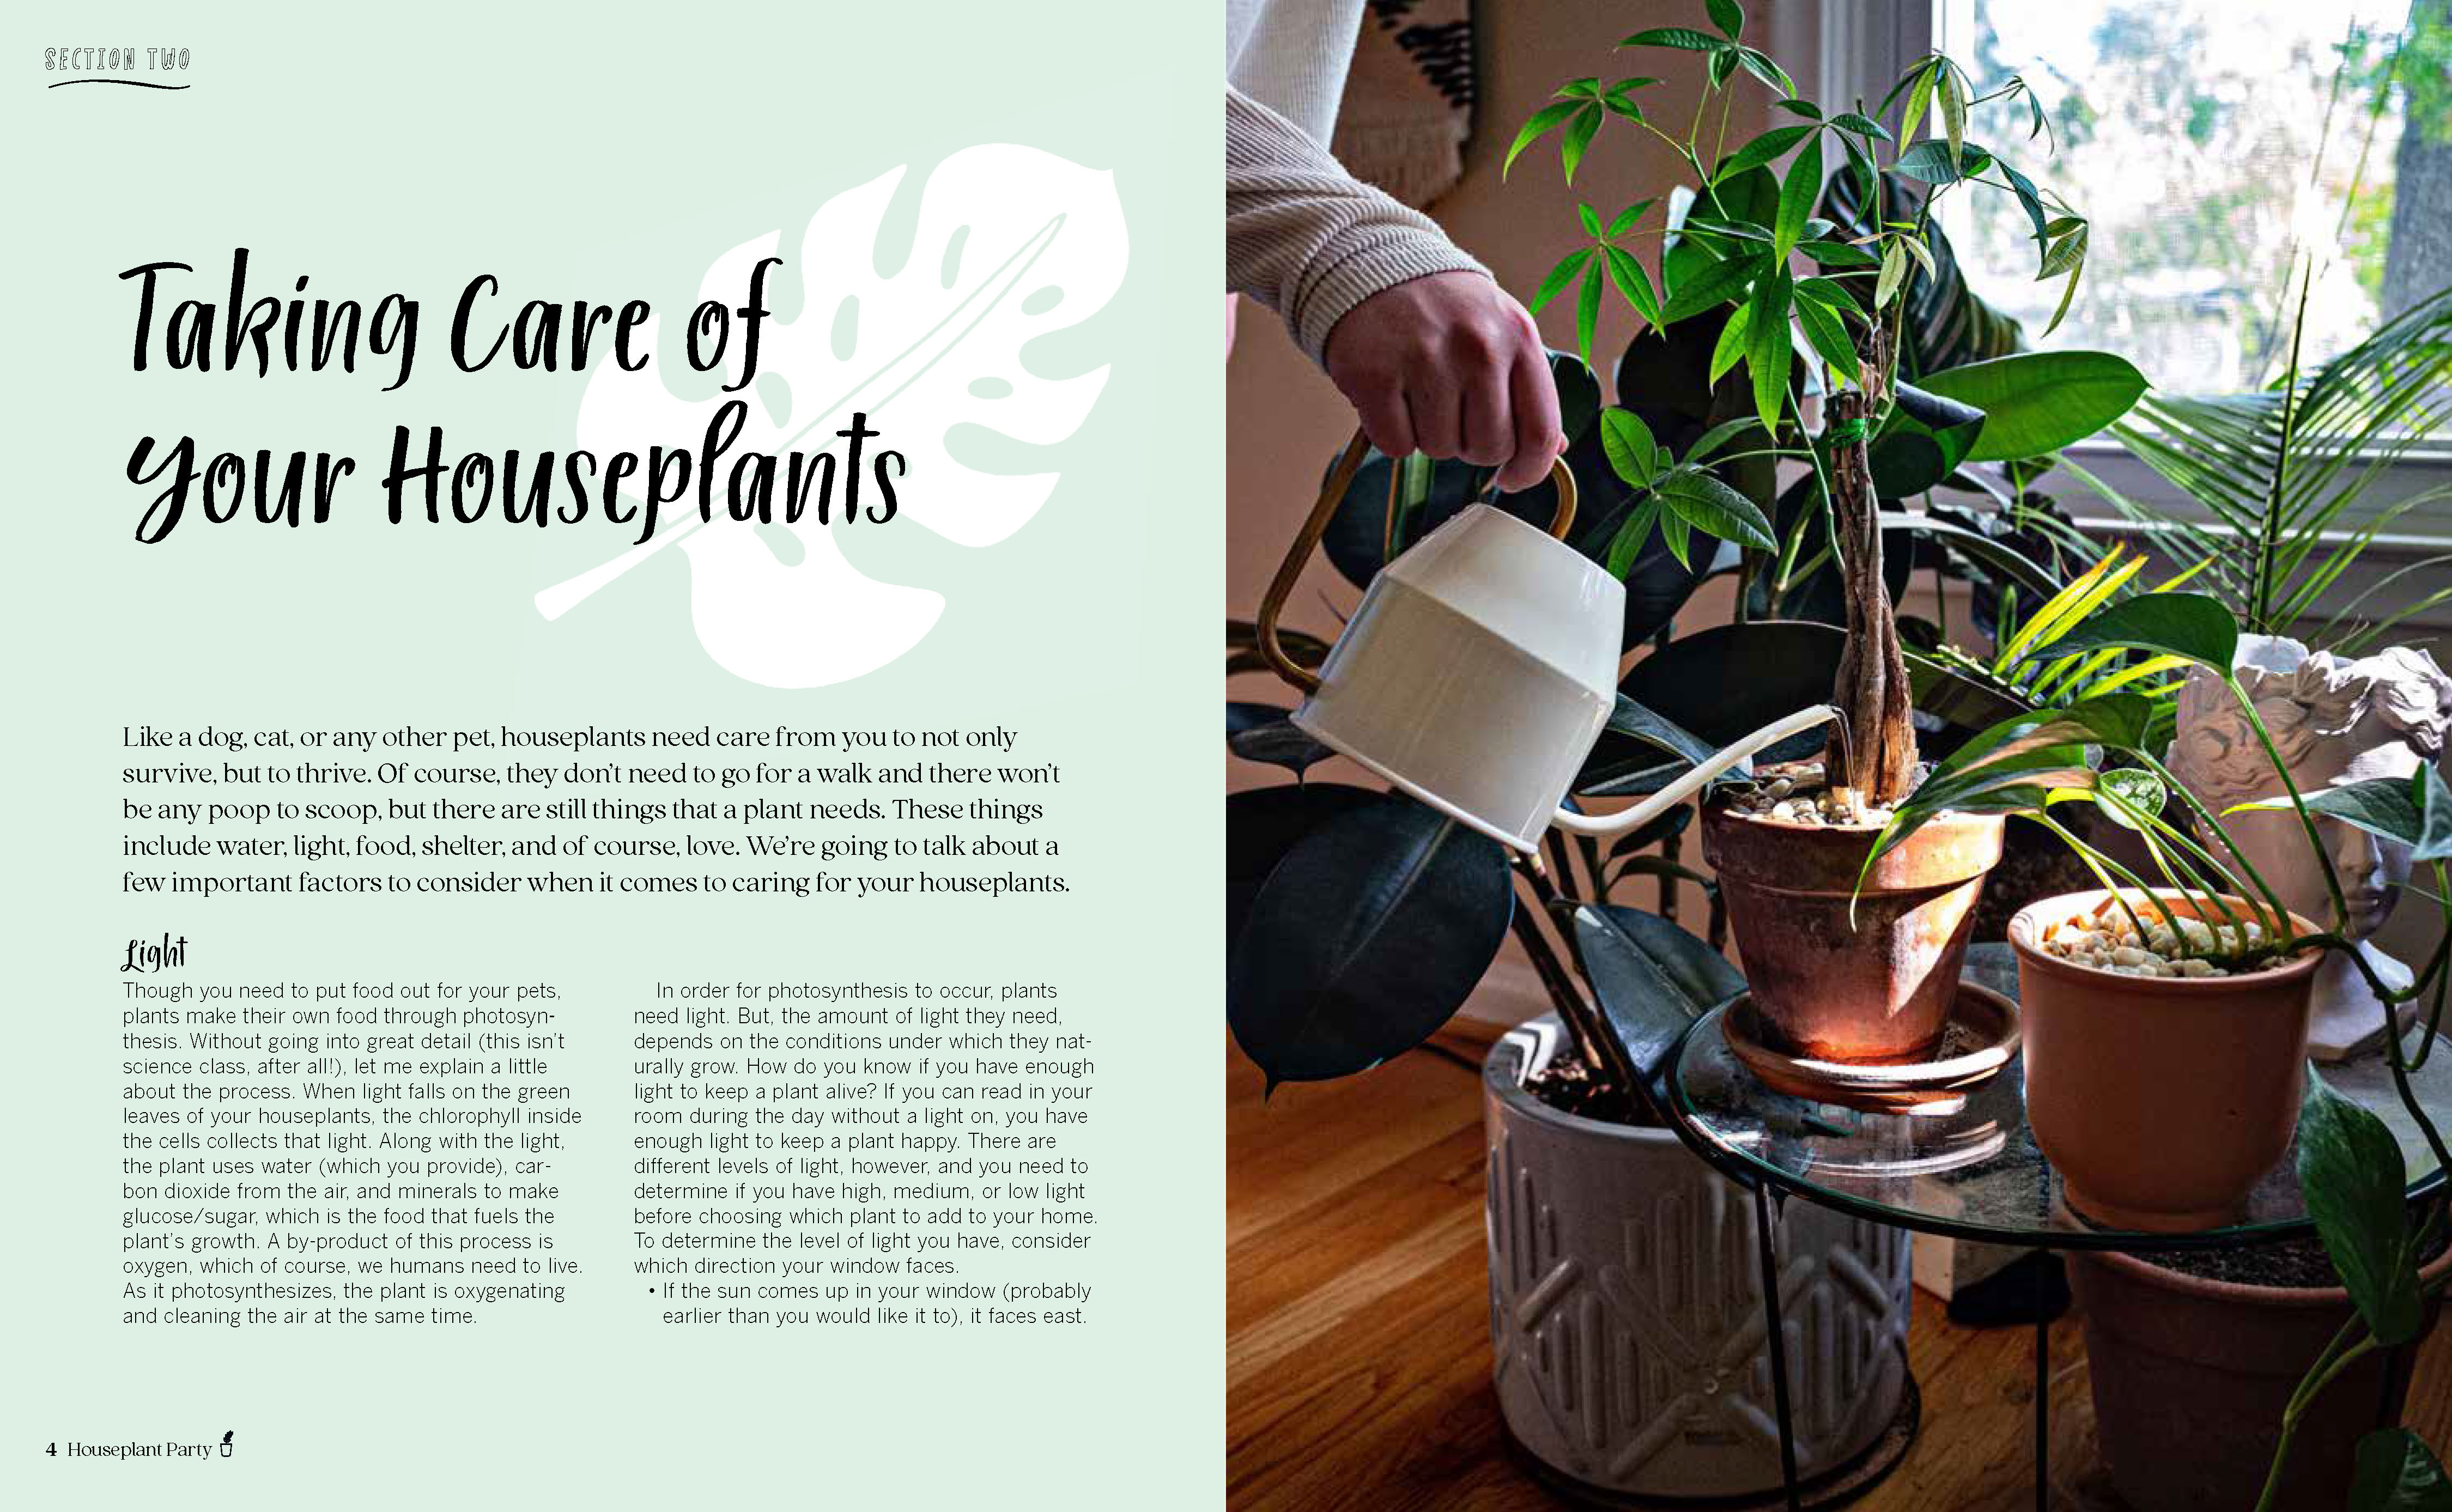 Creative Houseplant Projects